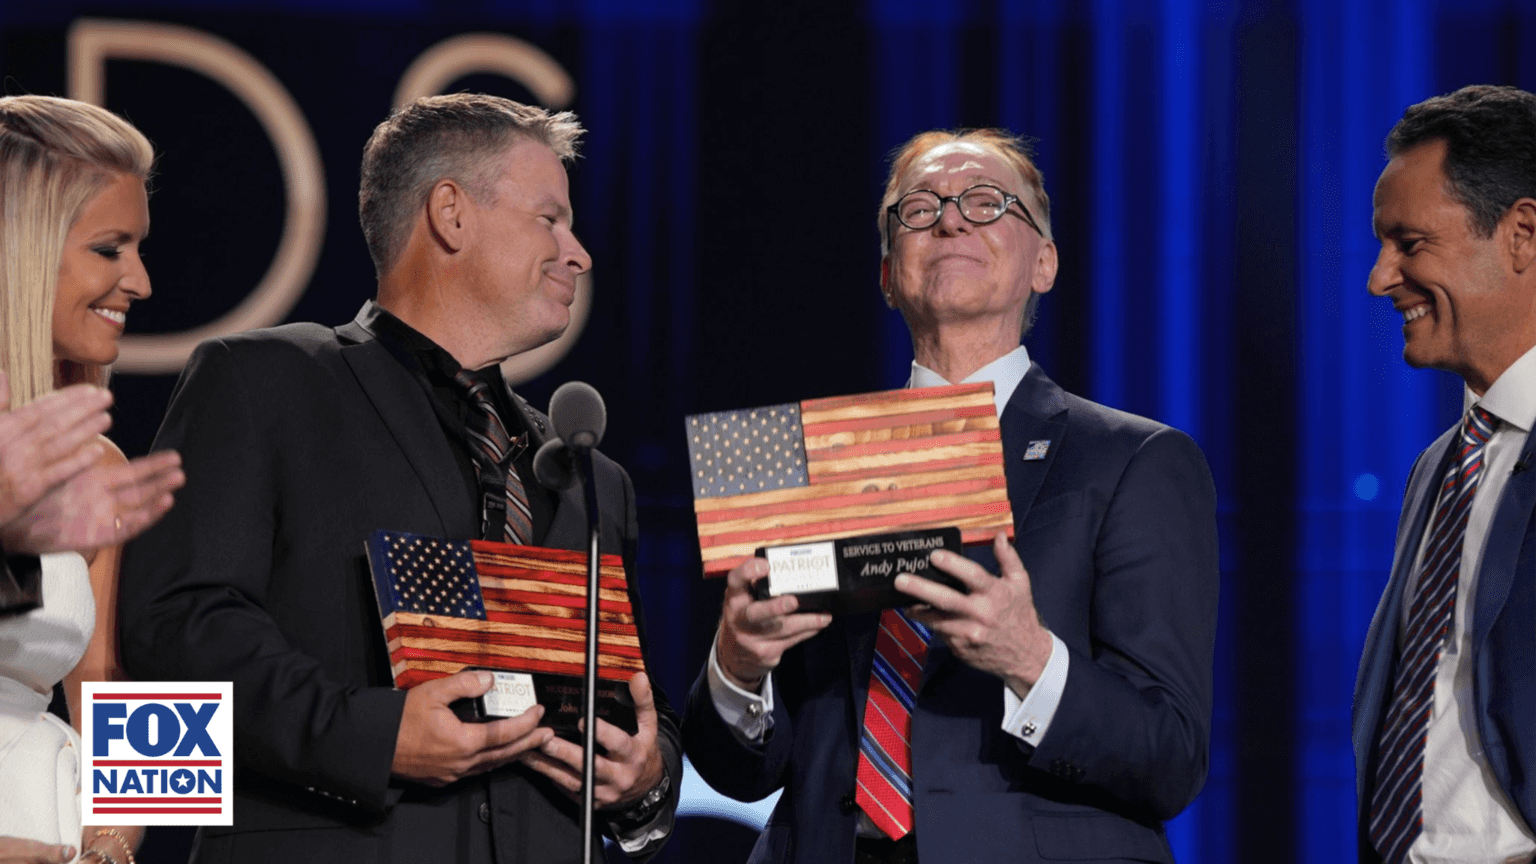 Fox Nation’s 4th Annual ‘Patriot Awards’ to honor military and more